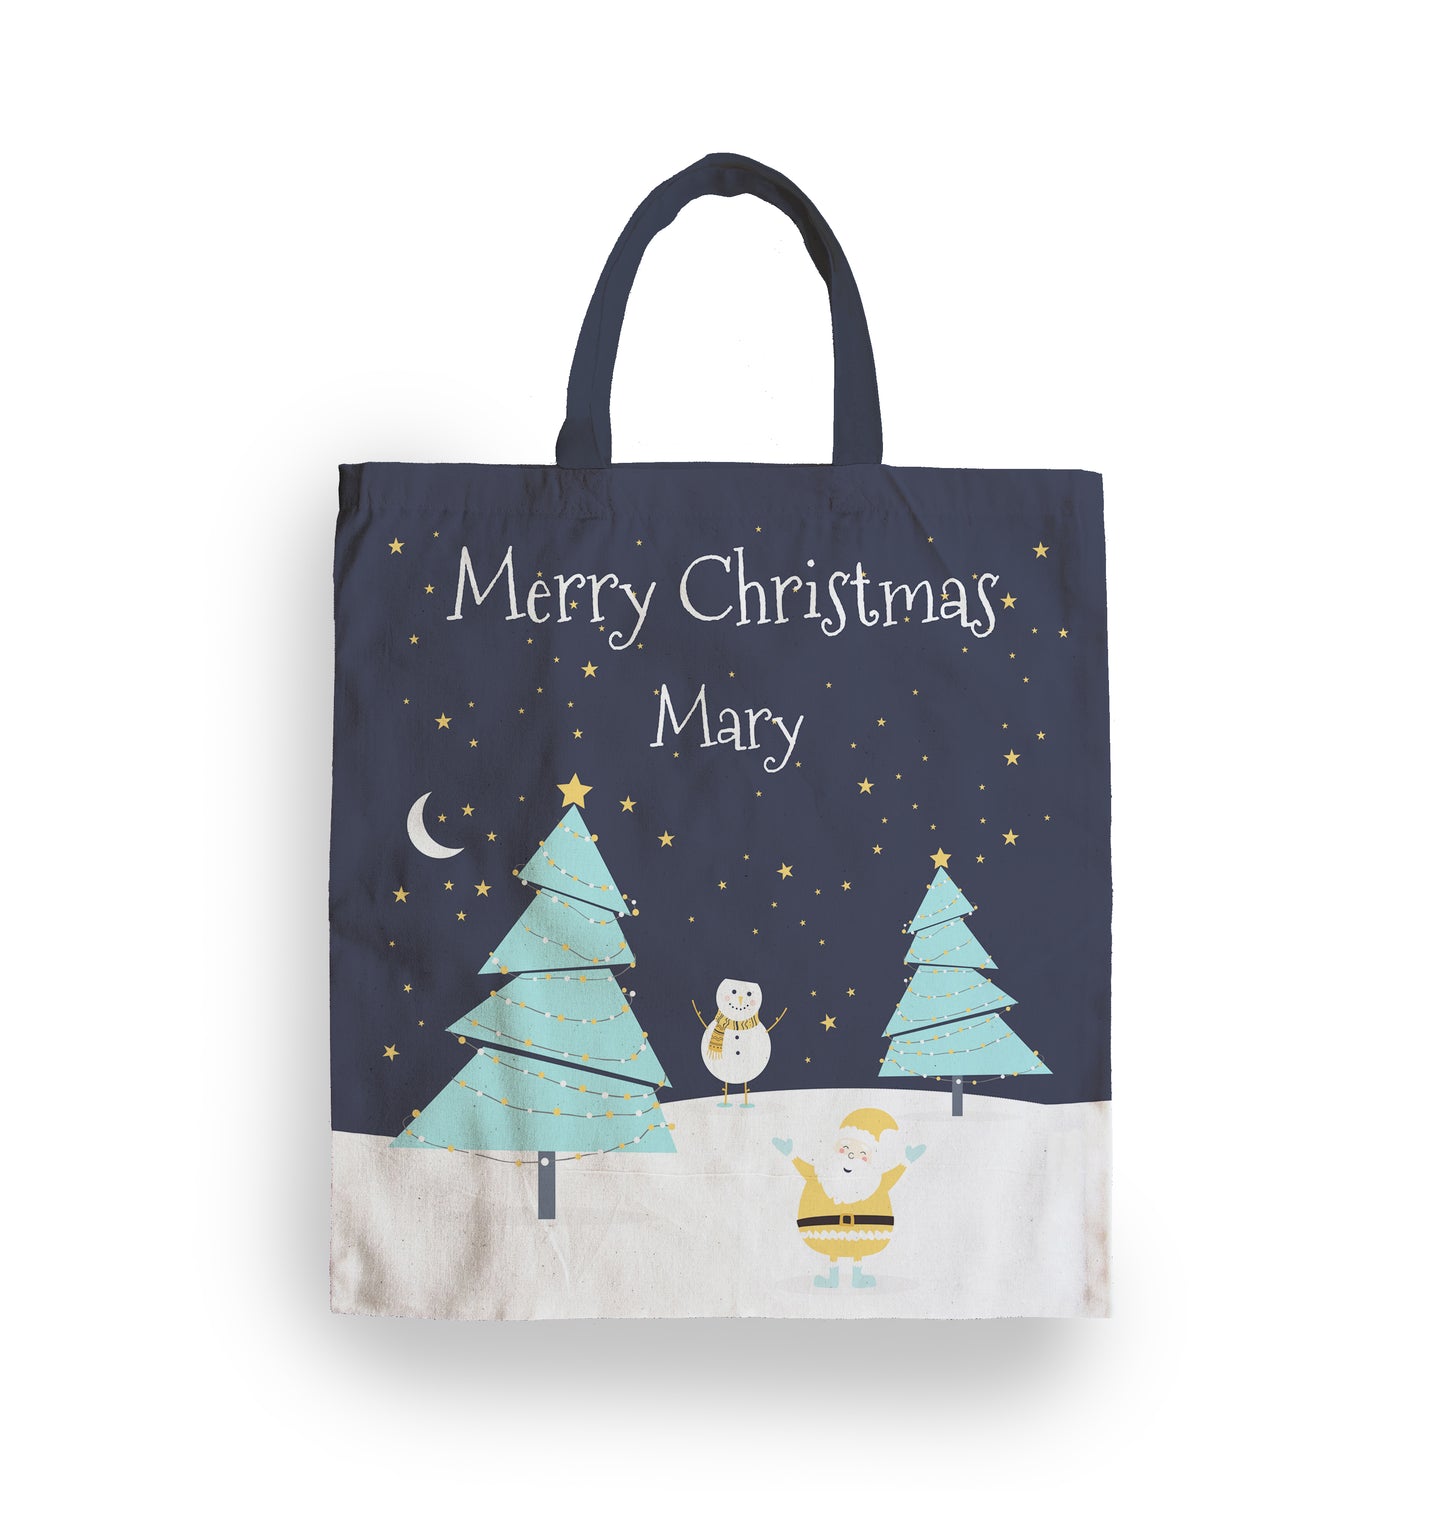 Personalised Tote Bag Christmas Night. Merry Christmas Text, and Name added. Santa, Snowman, Trees, and Stars.